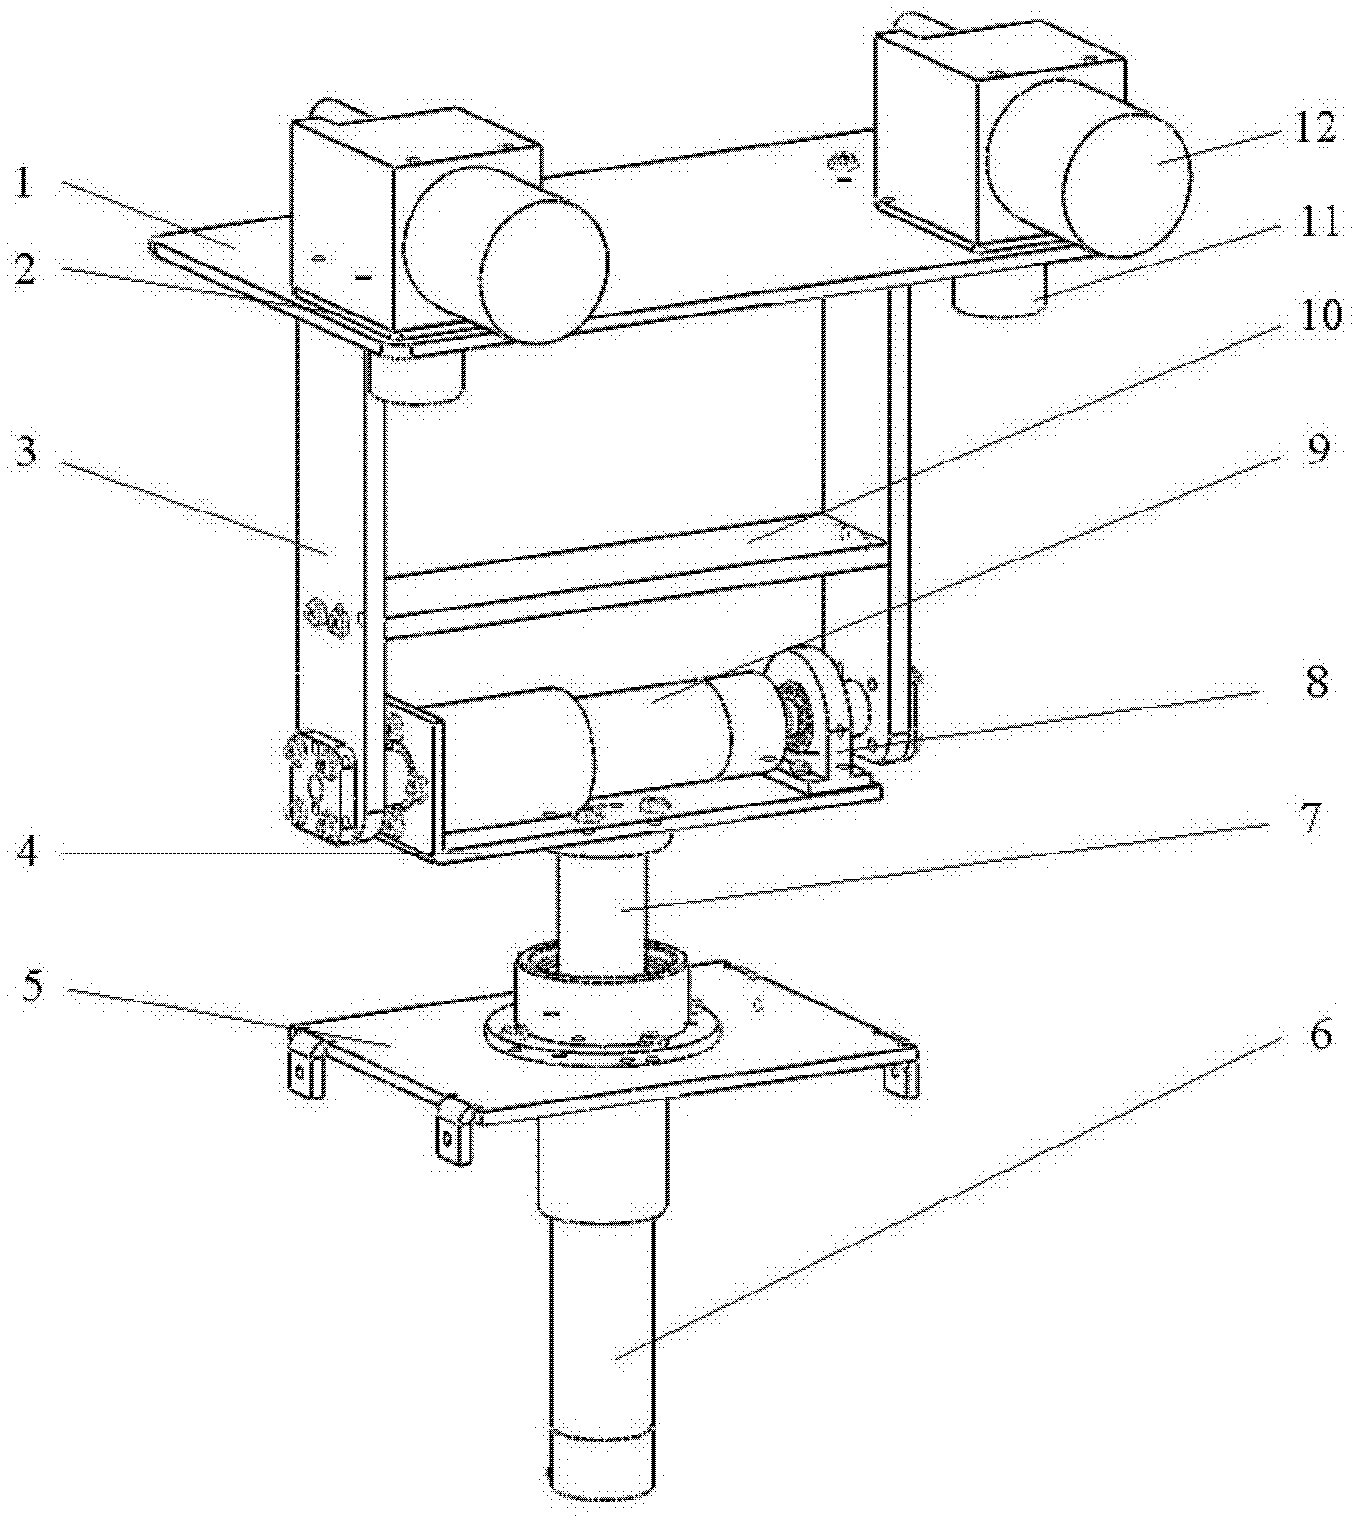 Wide-angle binocular vision identifying and positioning device for service robot